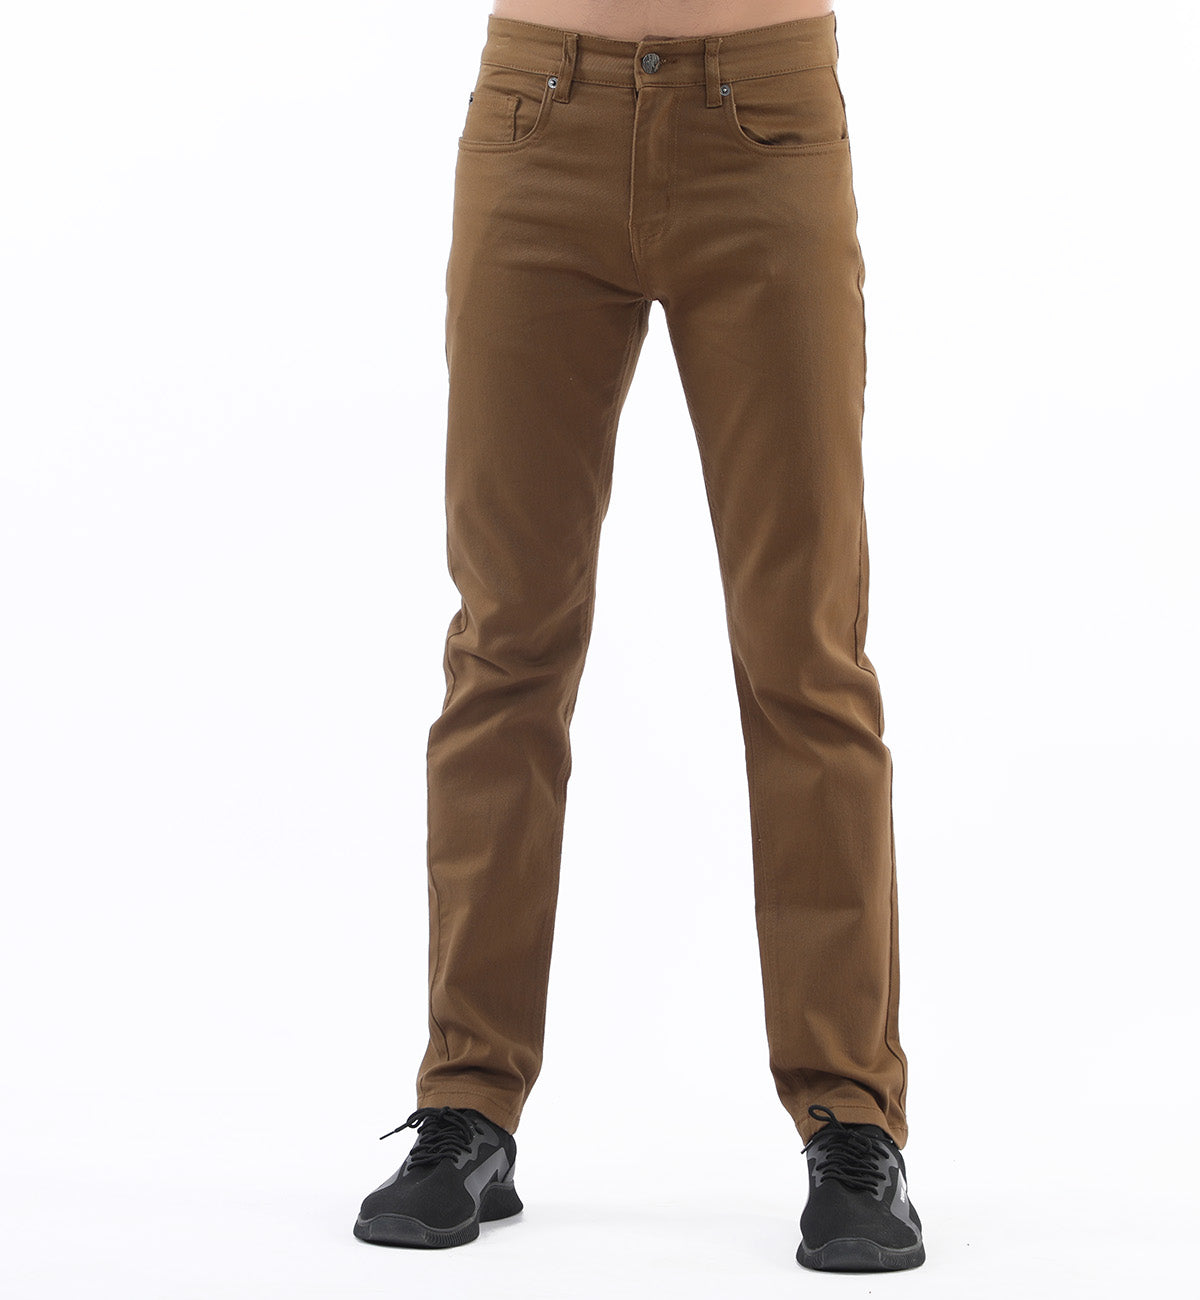 slim fitted brown jeans for men